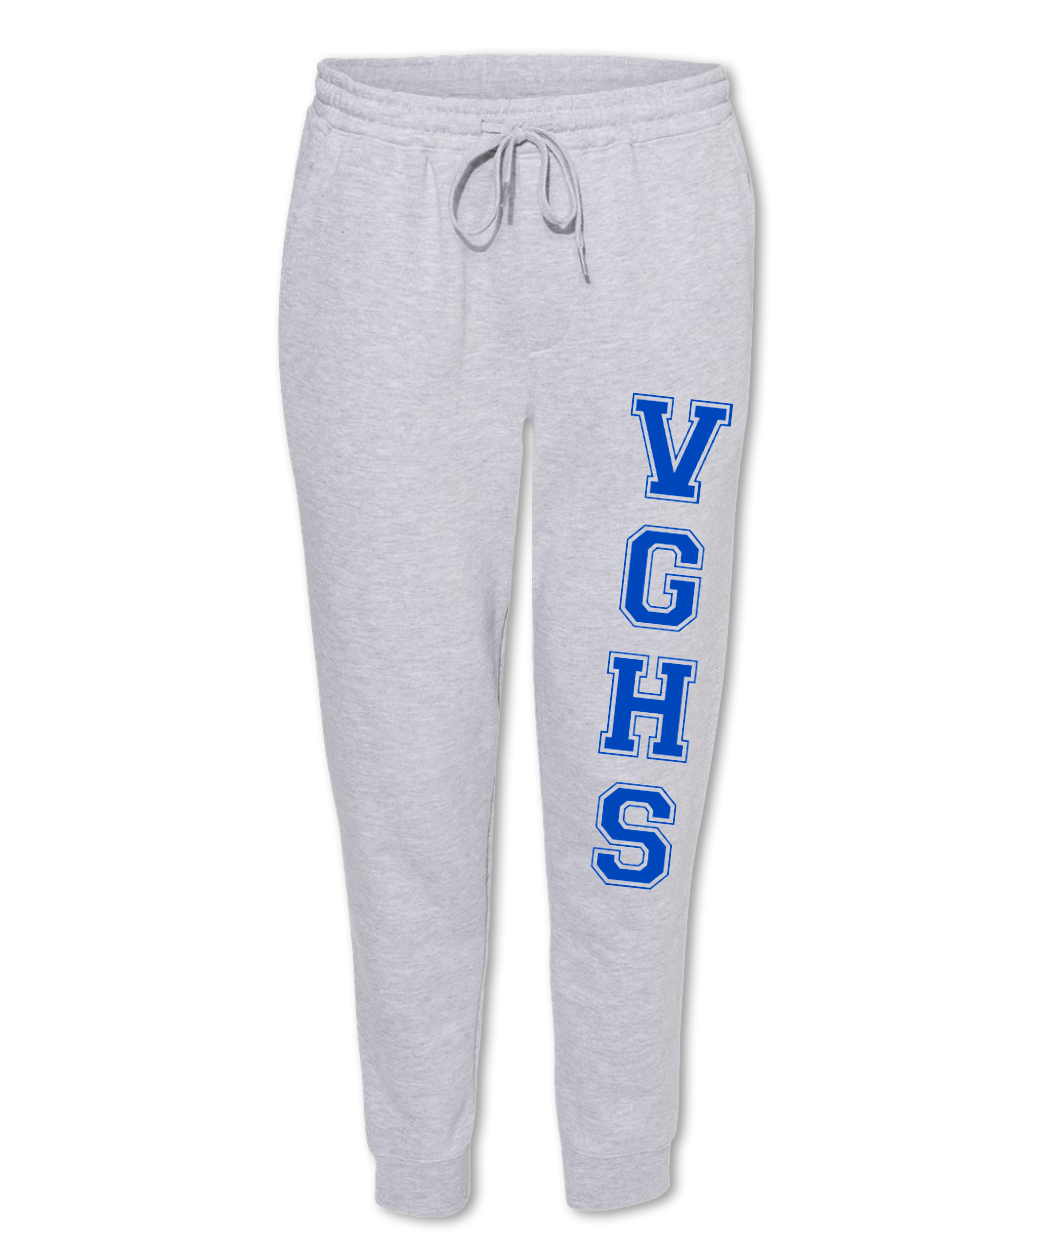 Light grey heathered joggers with varsity letters in blue going down the left leg starting at mid thigh and going down just below the knee, 